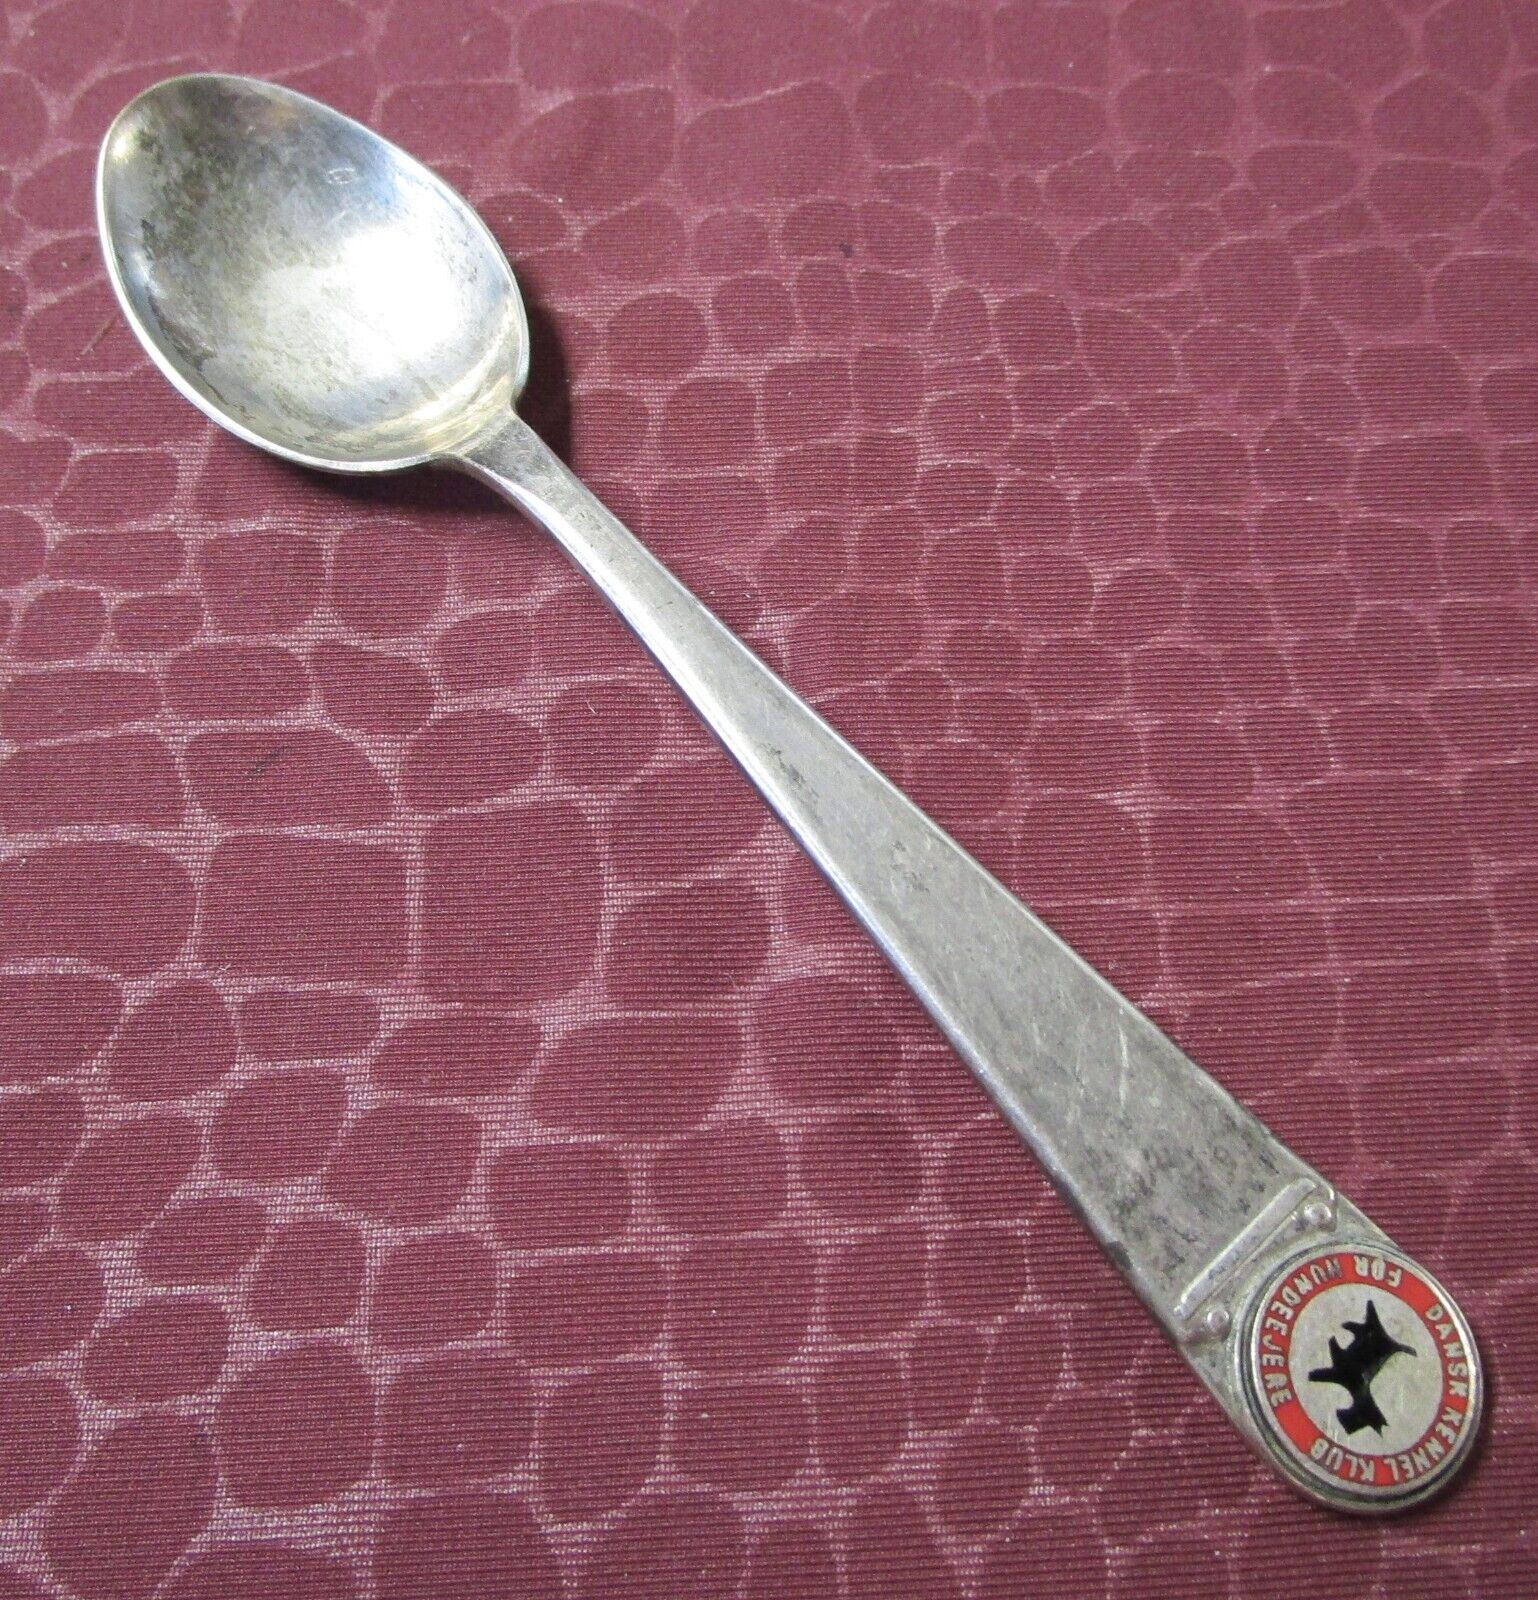 DANSK KENNEL KLUB Pewter Collectible Spoon Denmark As Found